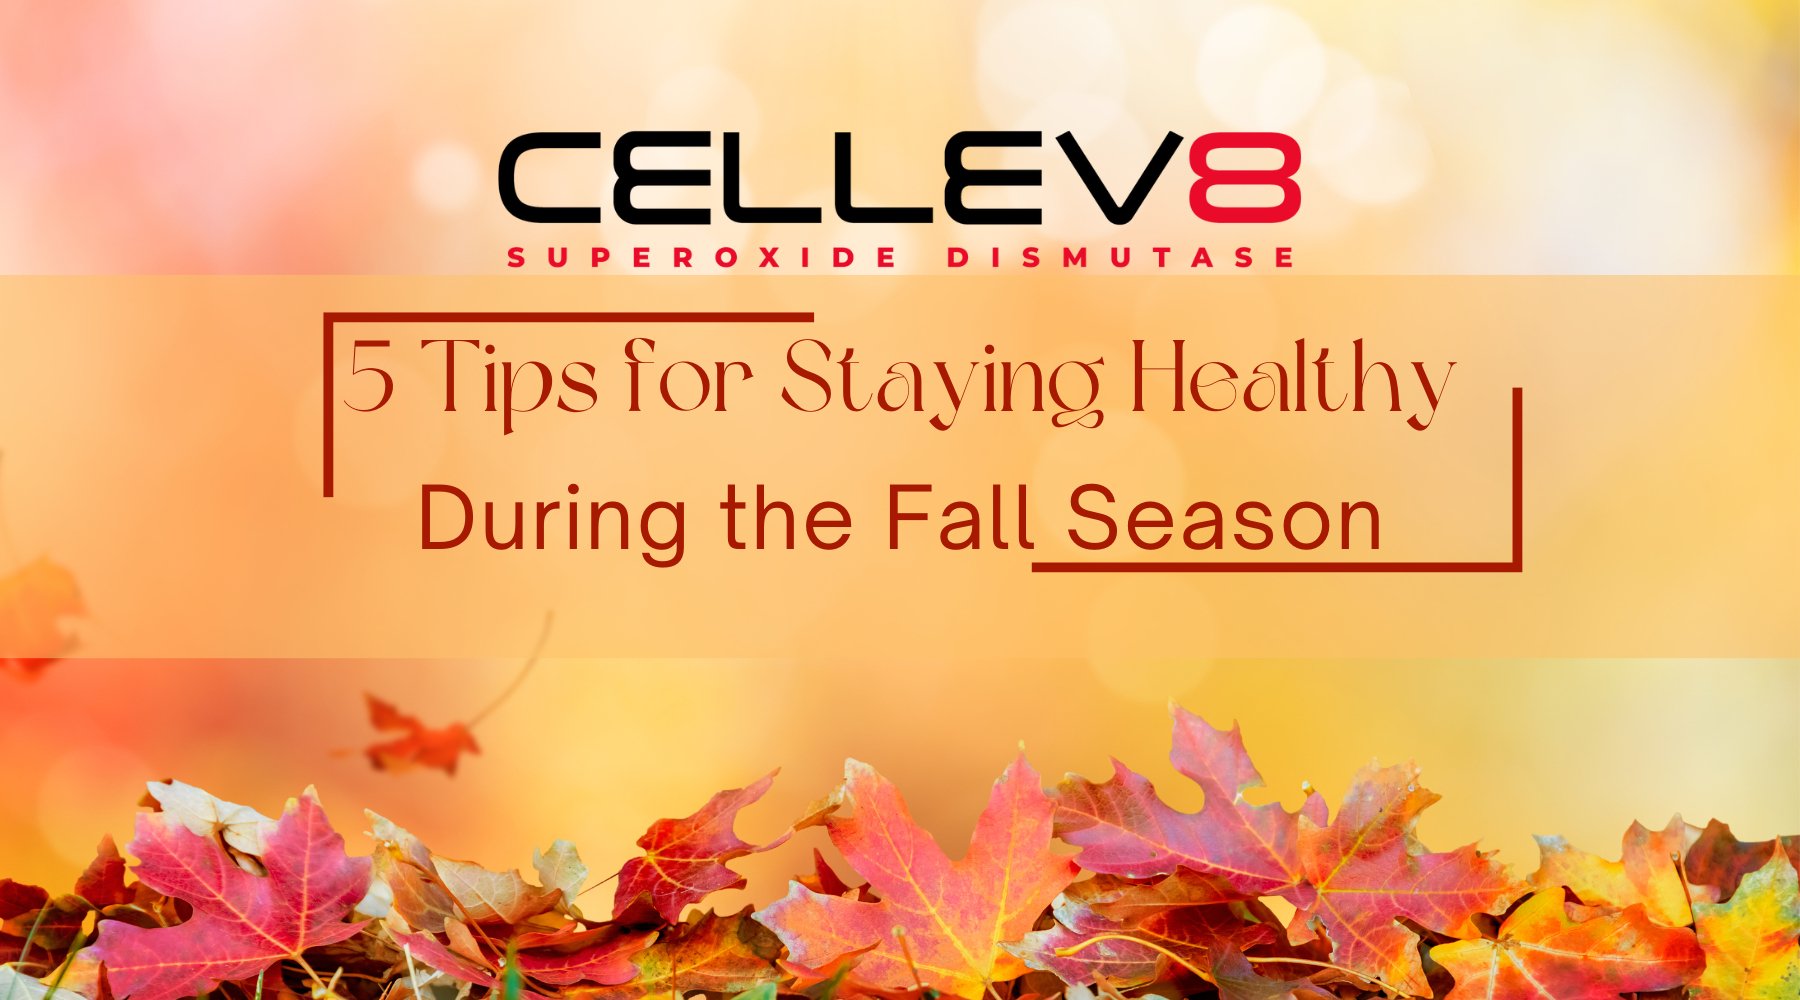 5 Tips for Staying Healthy During the Fall Season - Cellev8